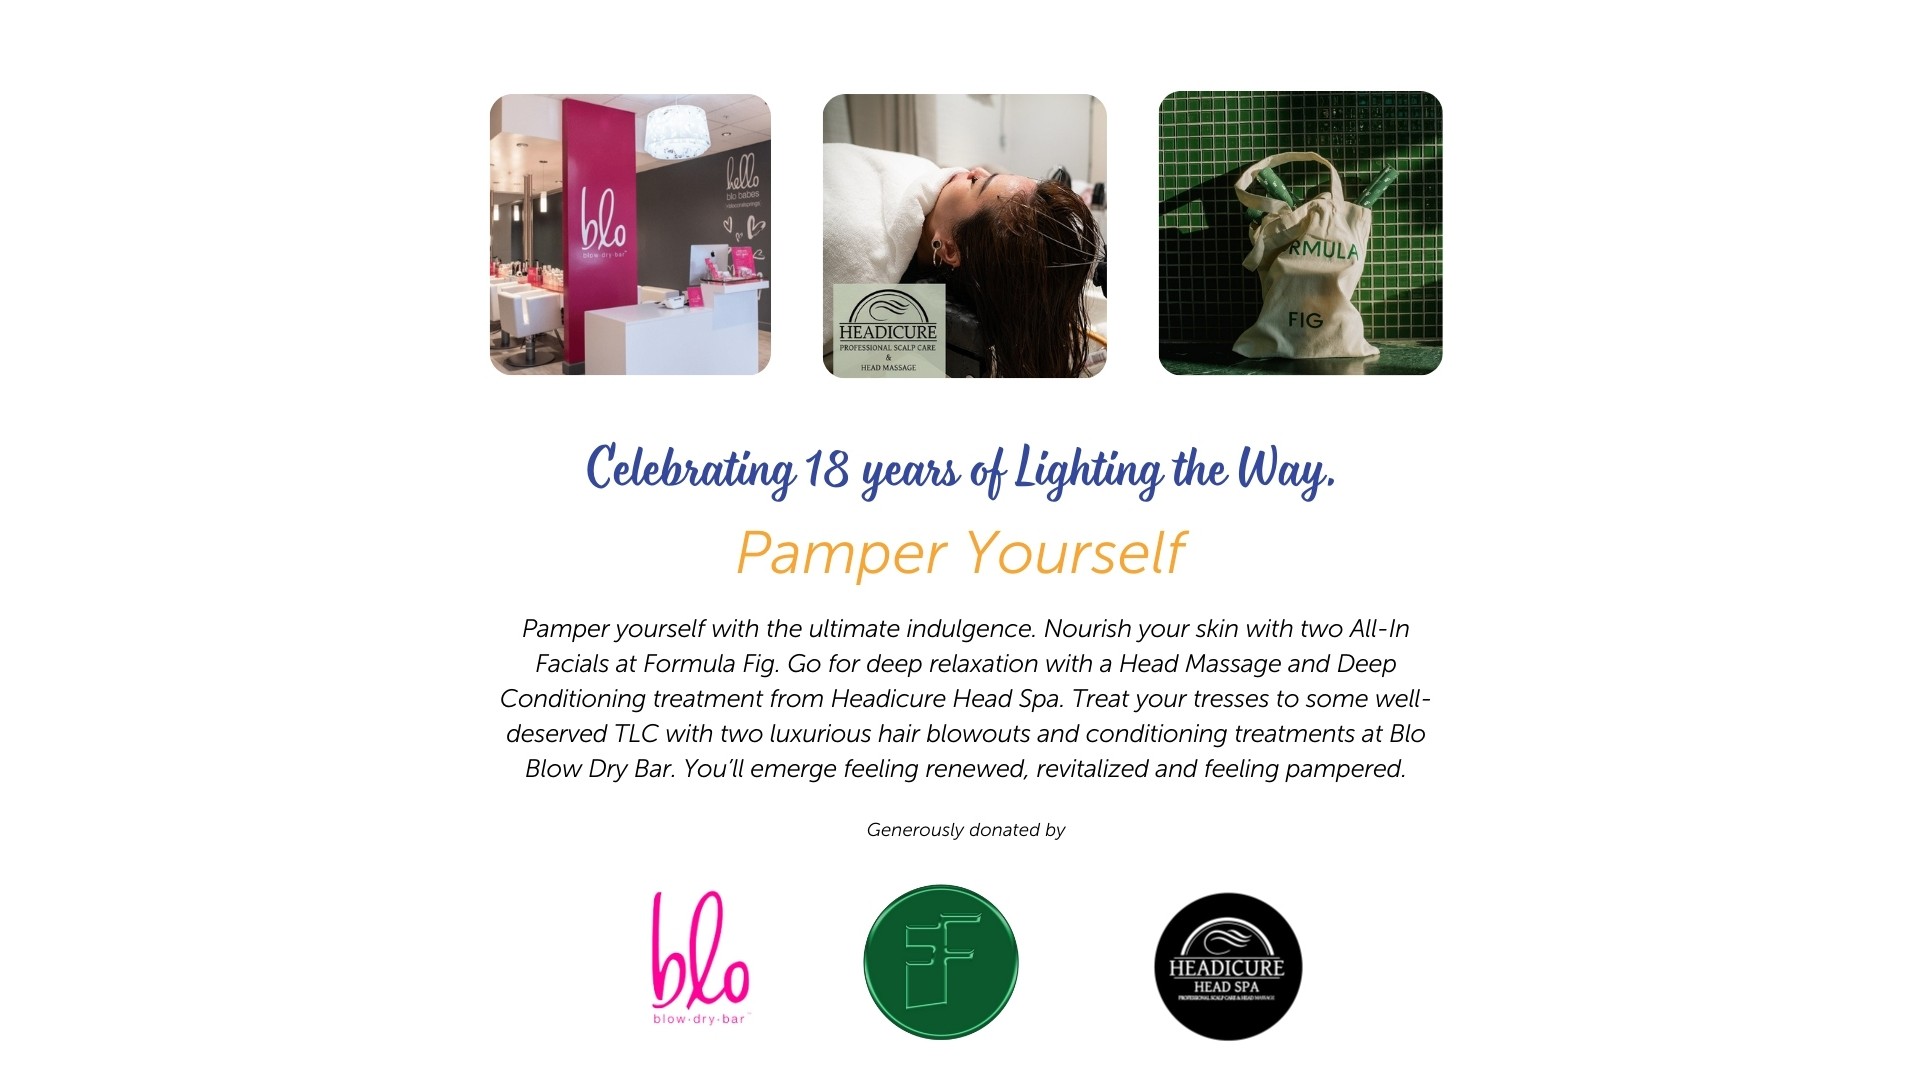 Pamper Yourself